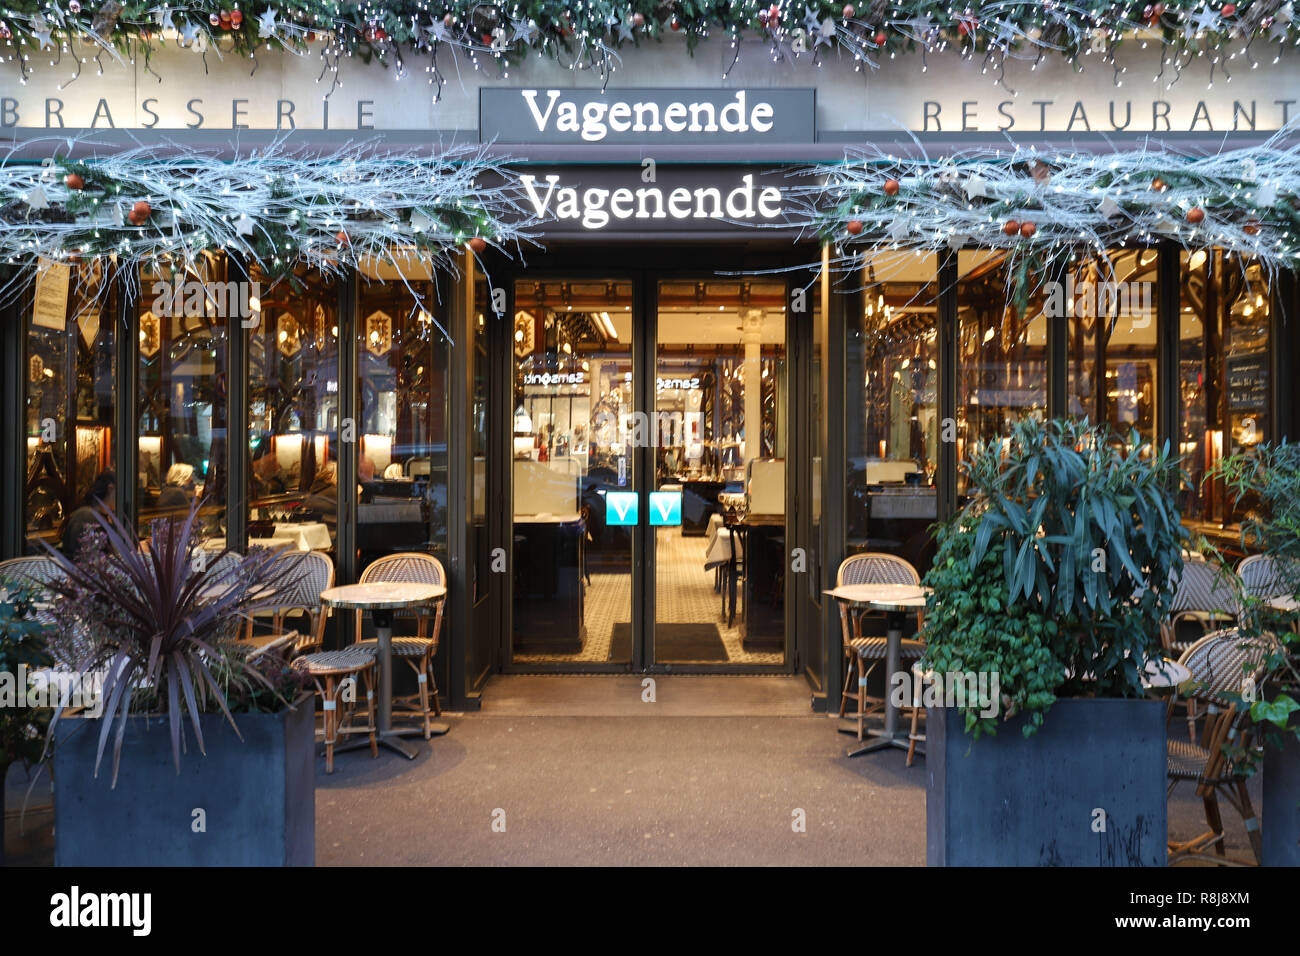 The traditional French restaurant Vagenende decorated for Christmas. It located near Saint Germain boulevard in Paris, France. Stock Photo